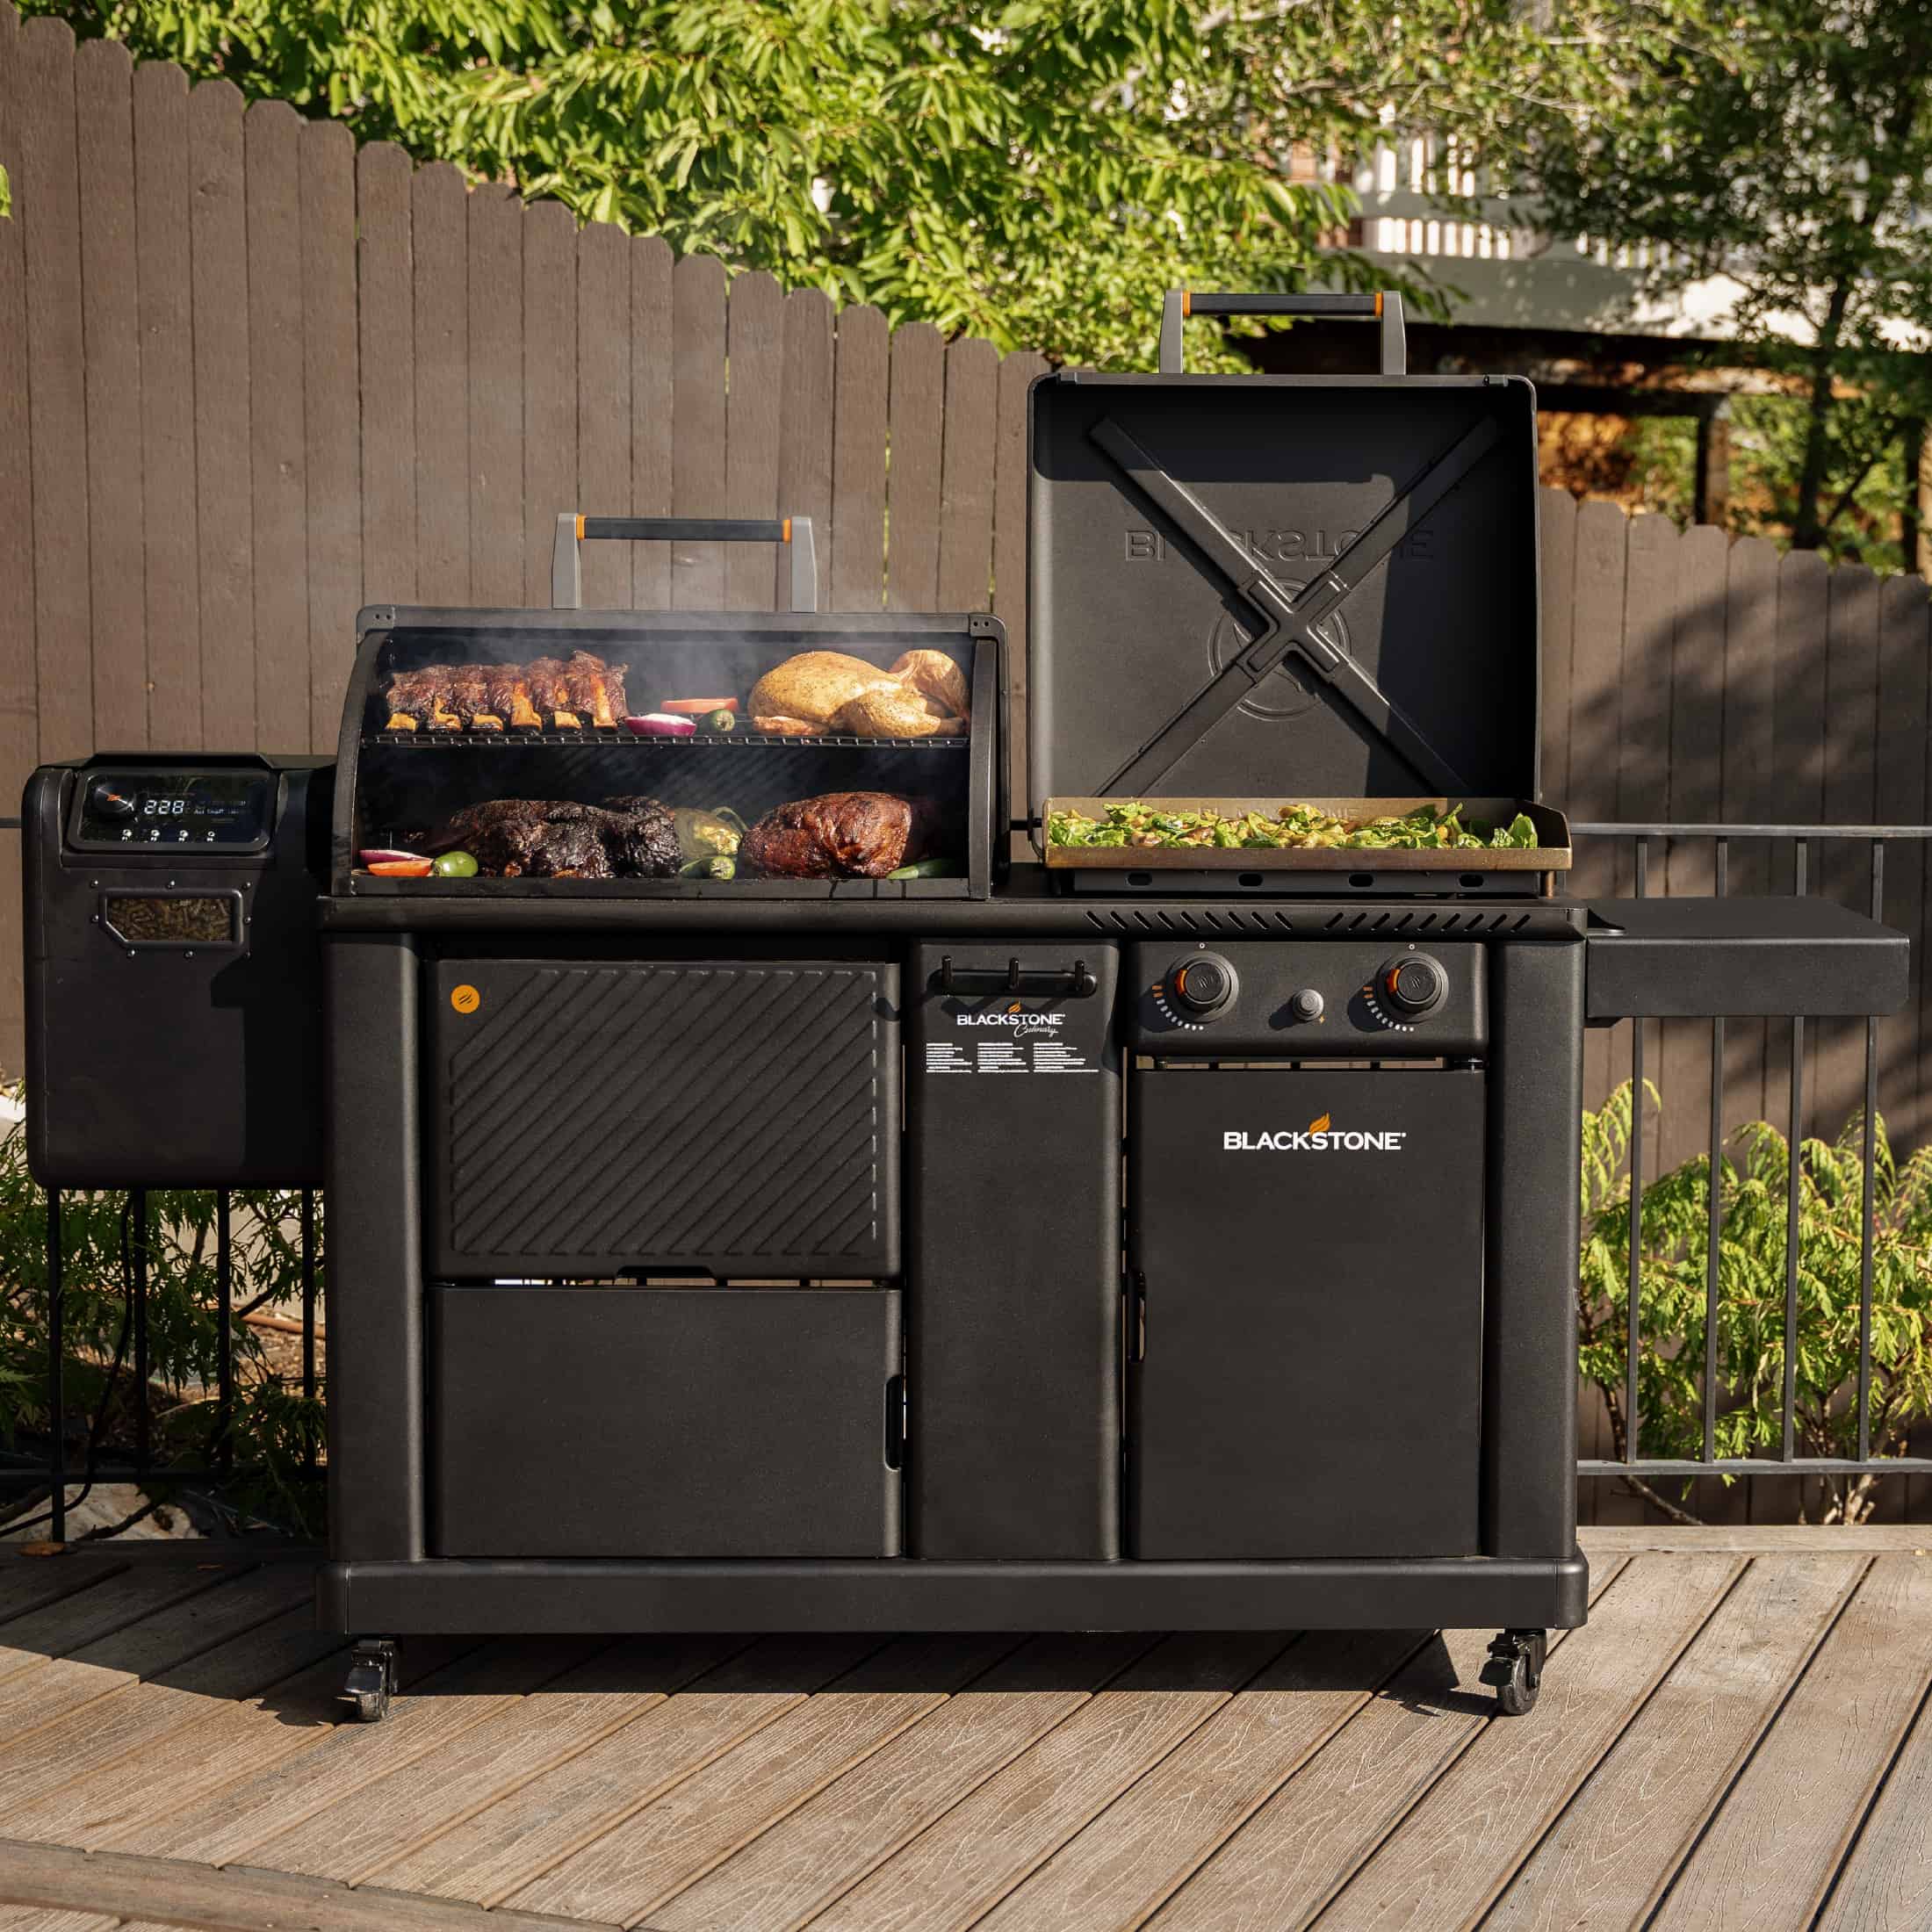 Blackstone pellet grill and smoker with griddle